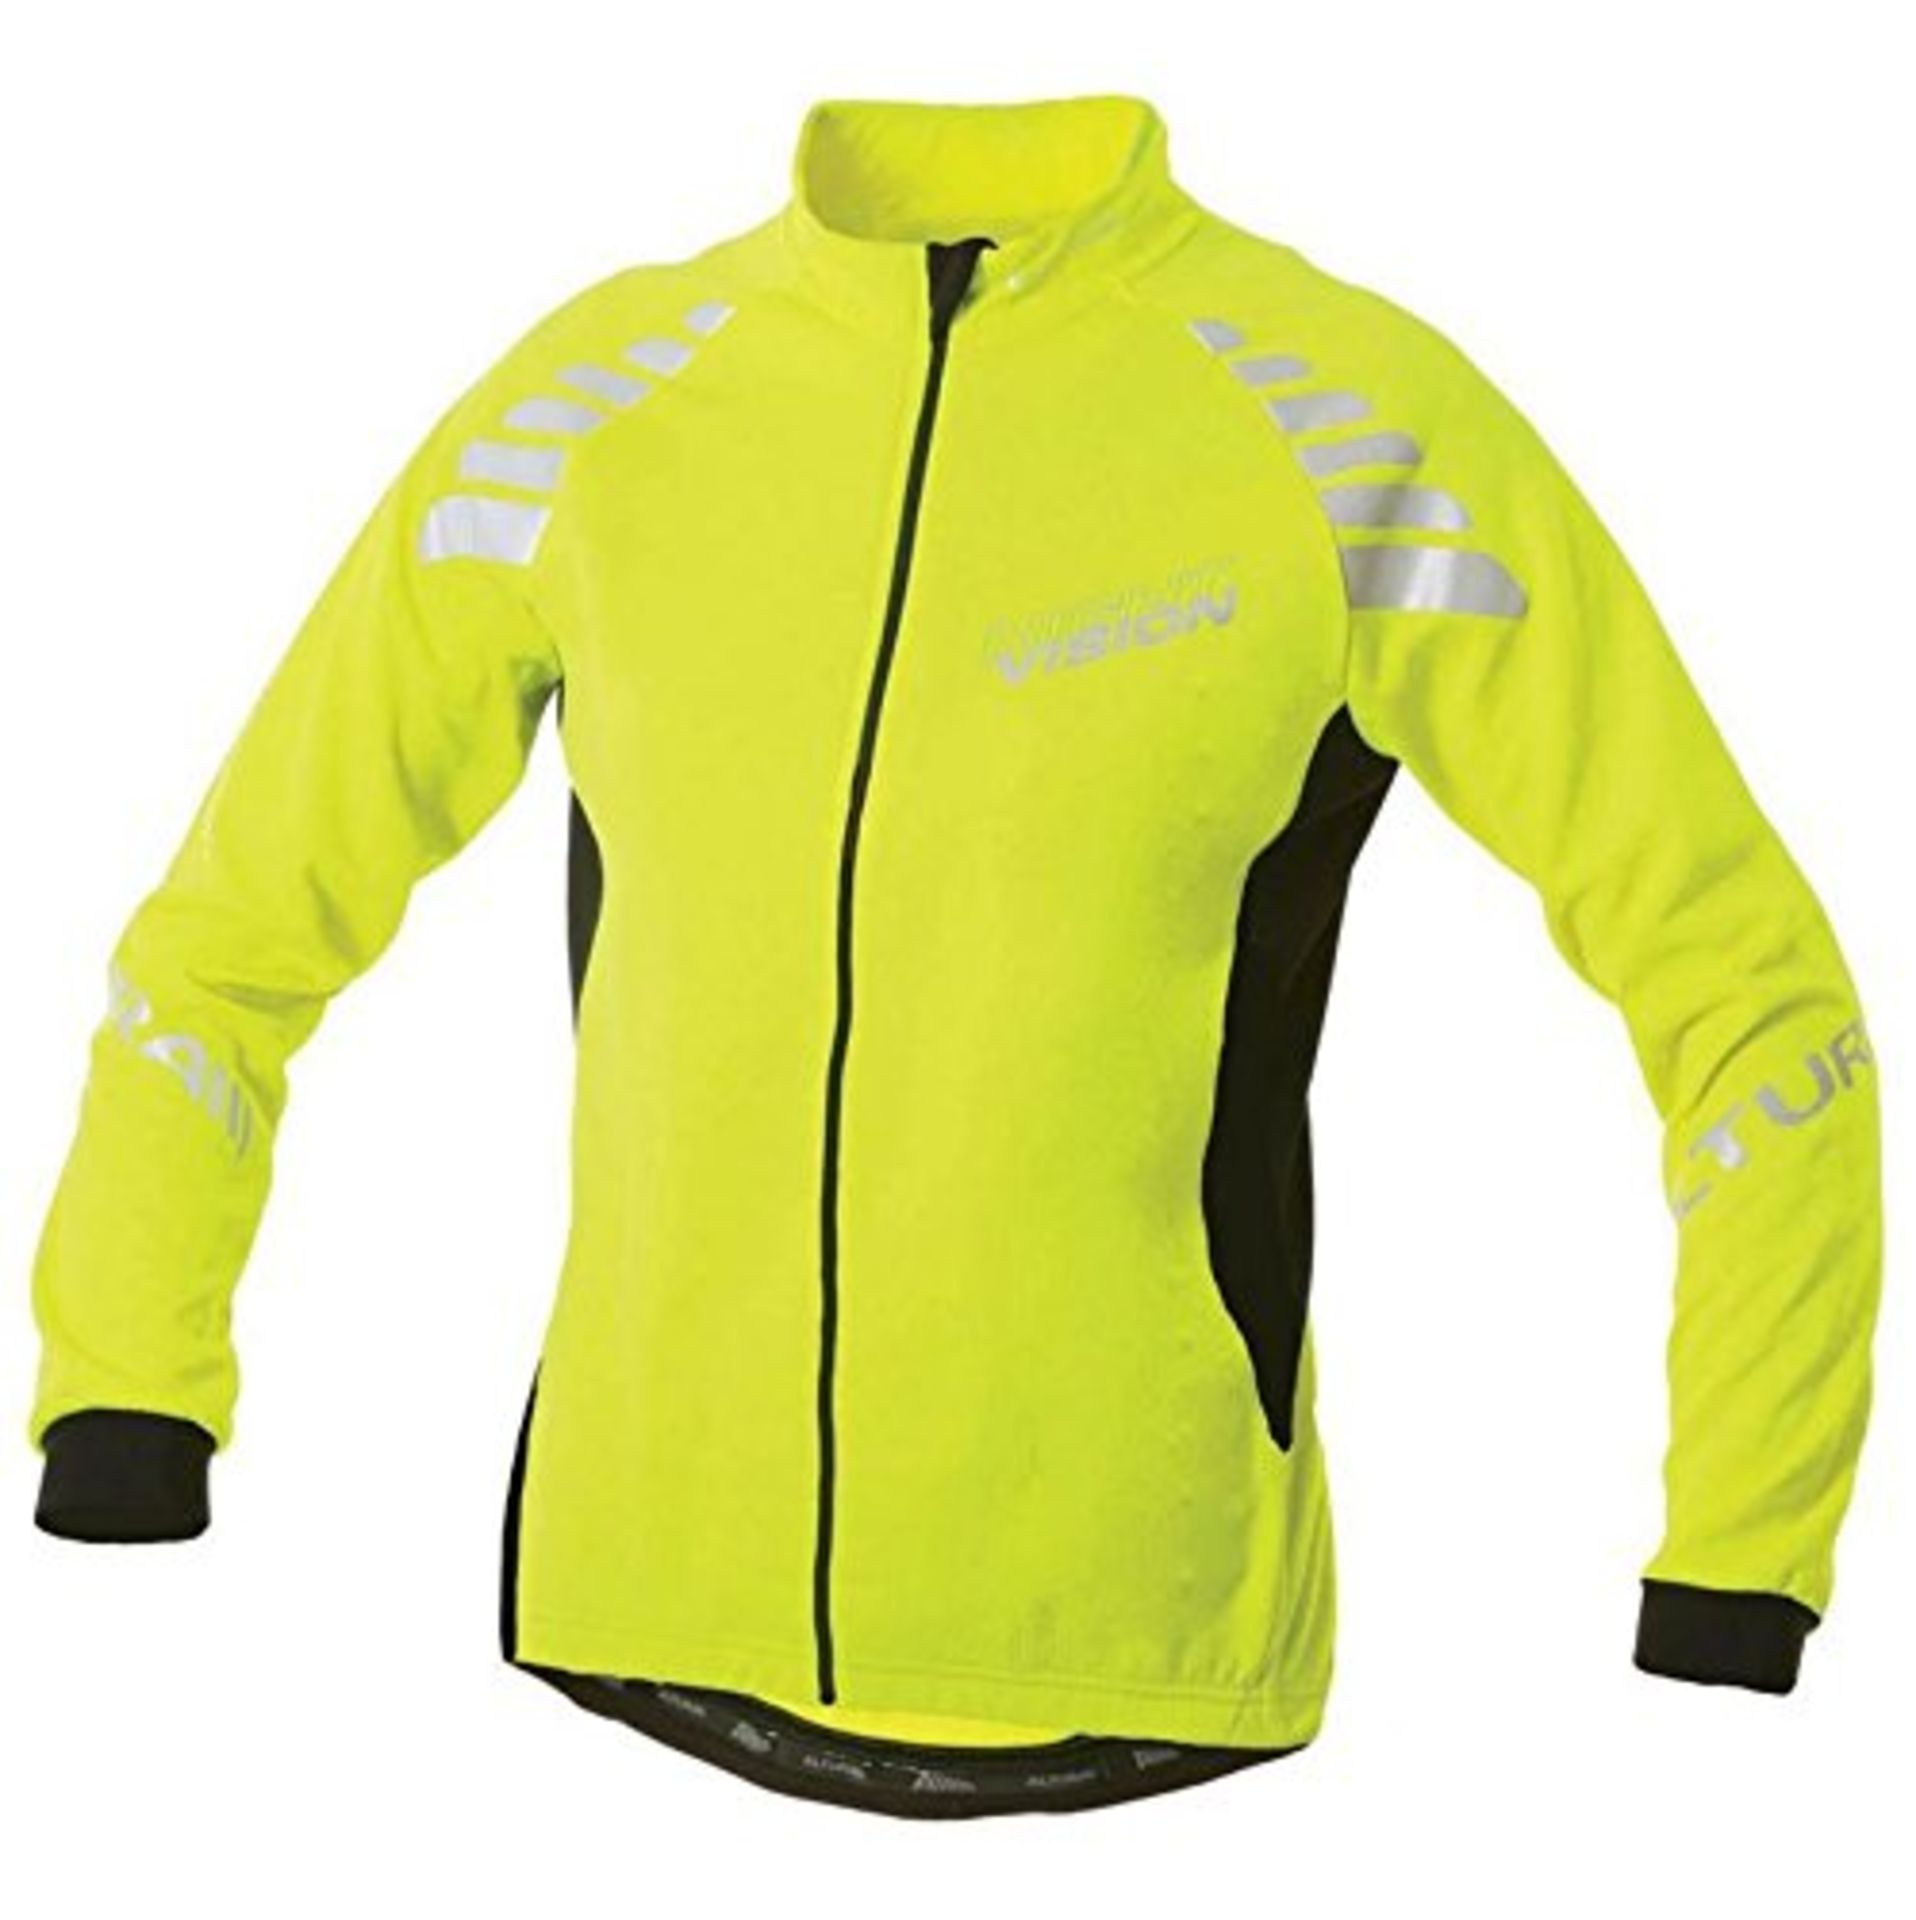 3 x Pieces of Altura Women's Cycling Clothing | Total RRP £95.48 | See Description for Details